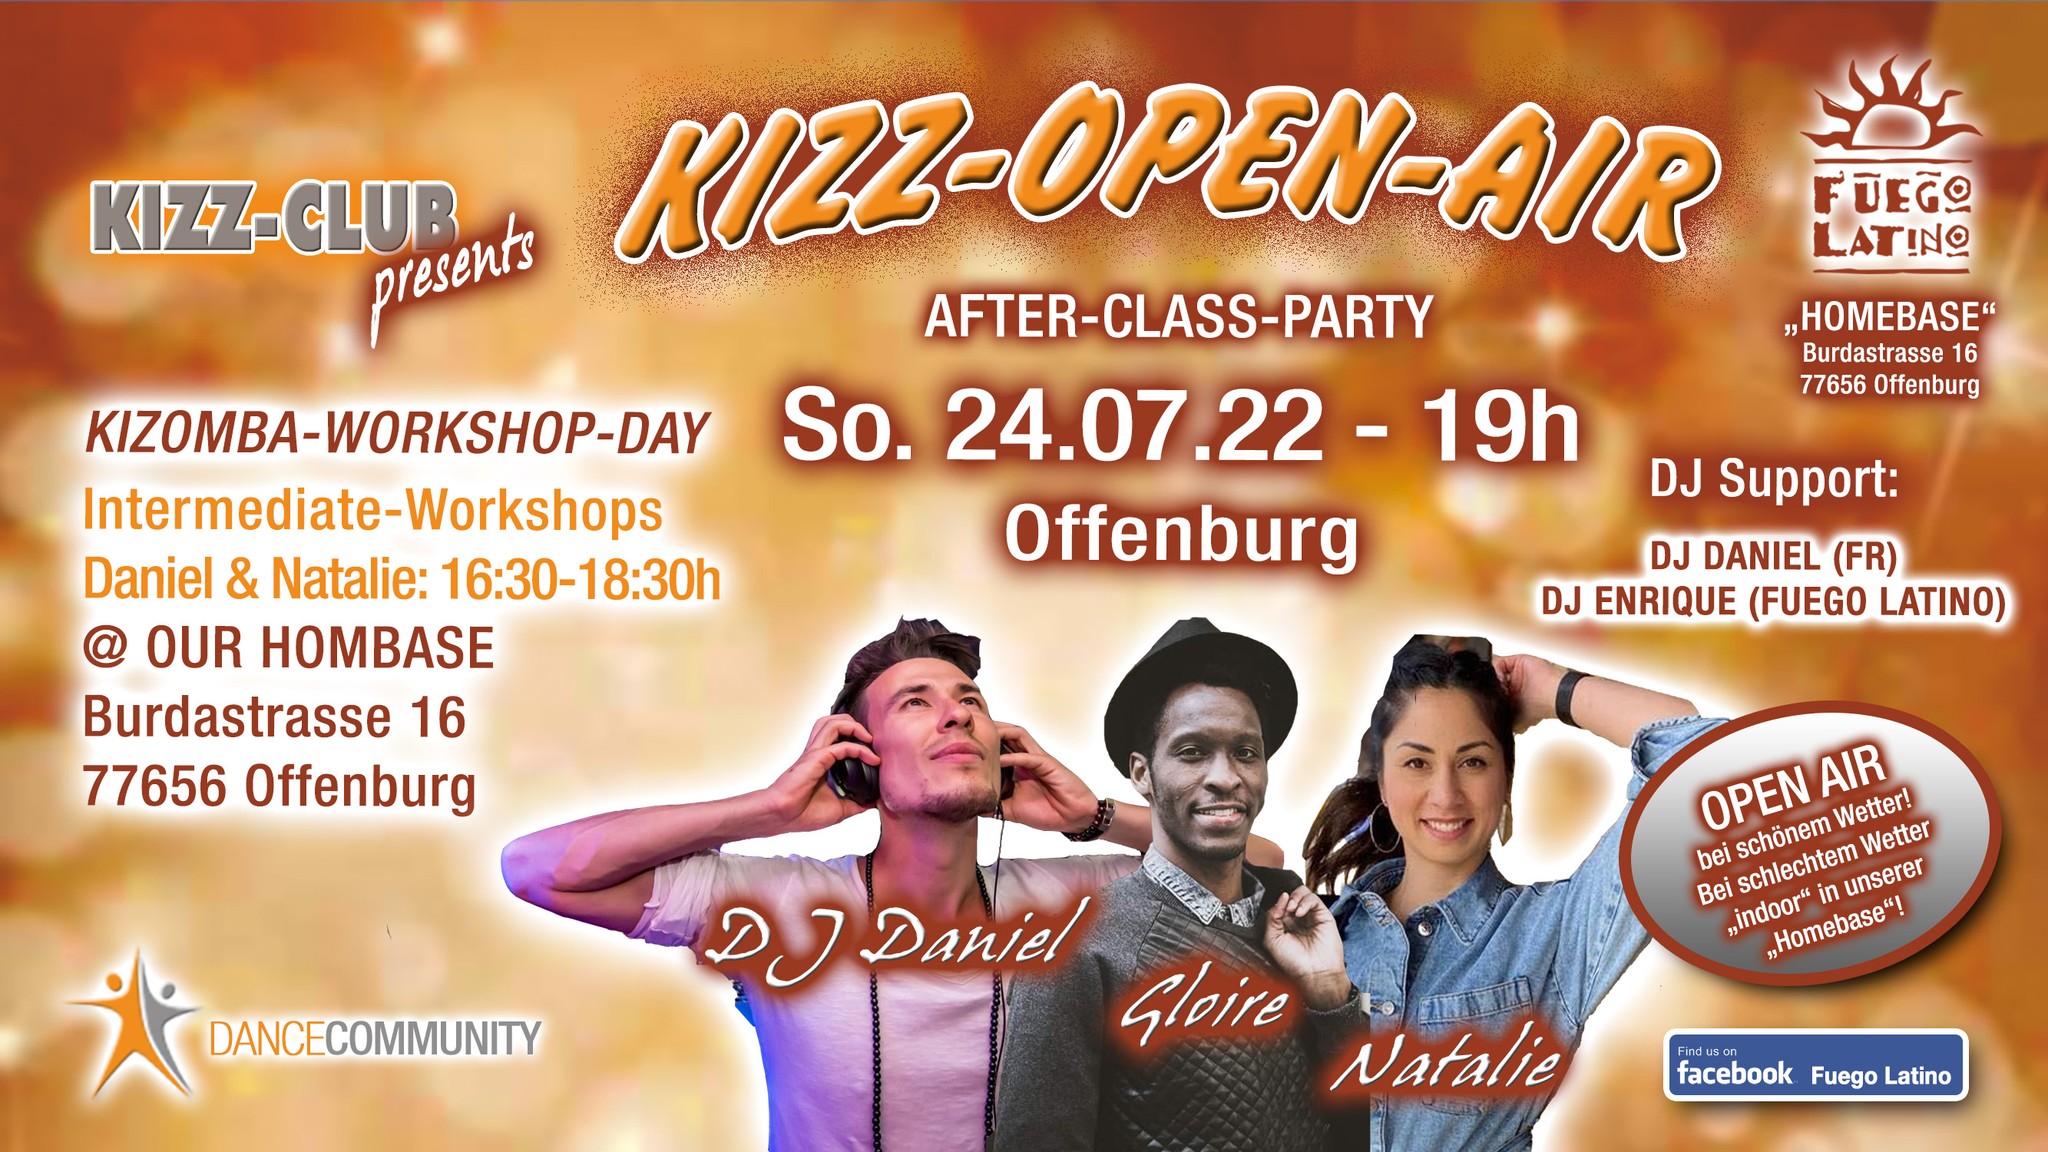 You are currently viewing KIZOMBA-WORKSHOP-DAY & KIZZ-Open Air in Offenburg